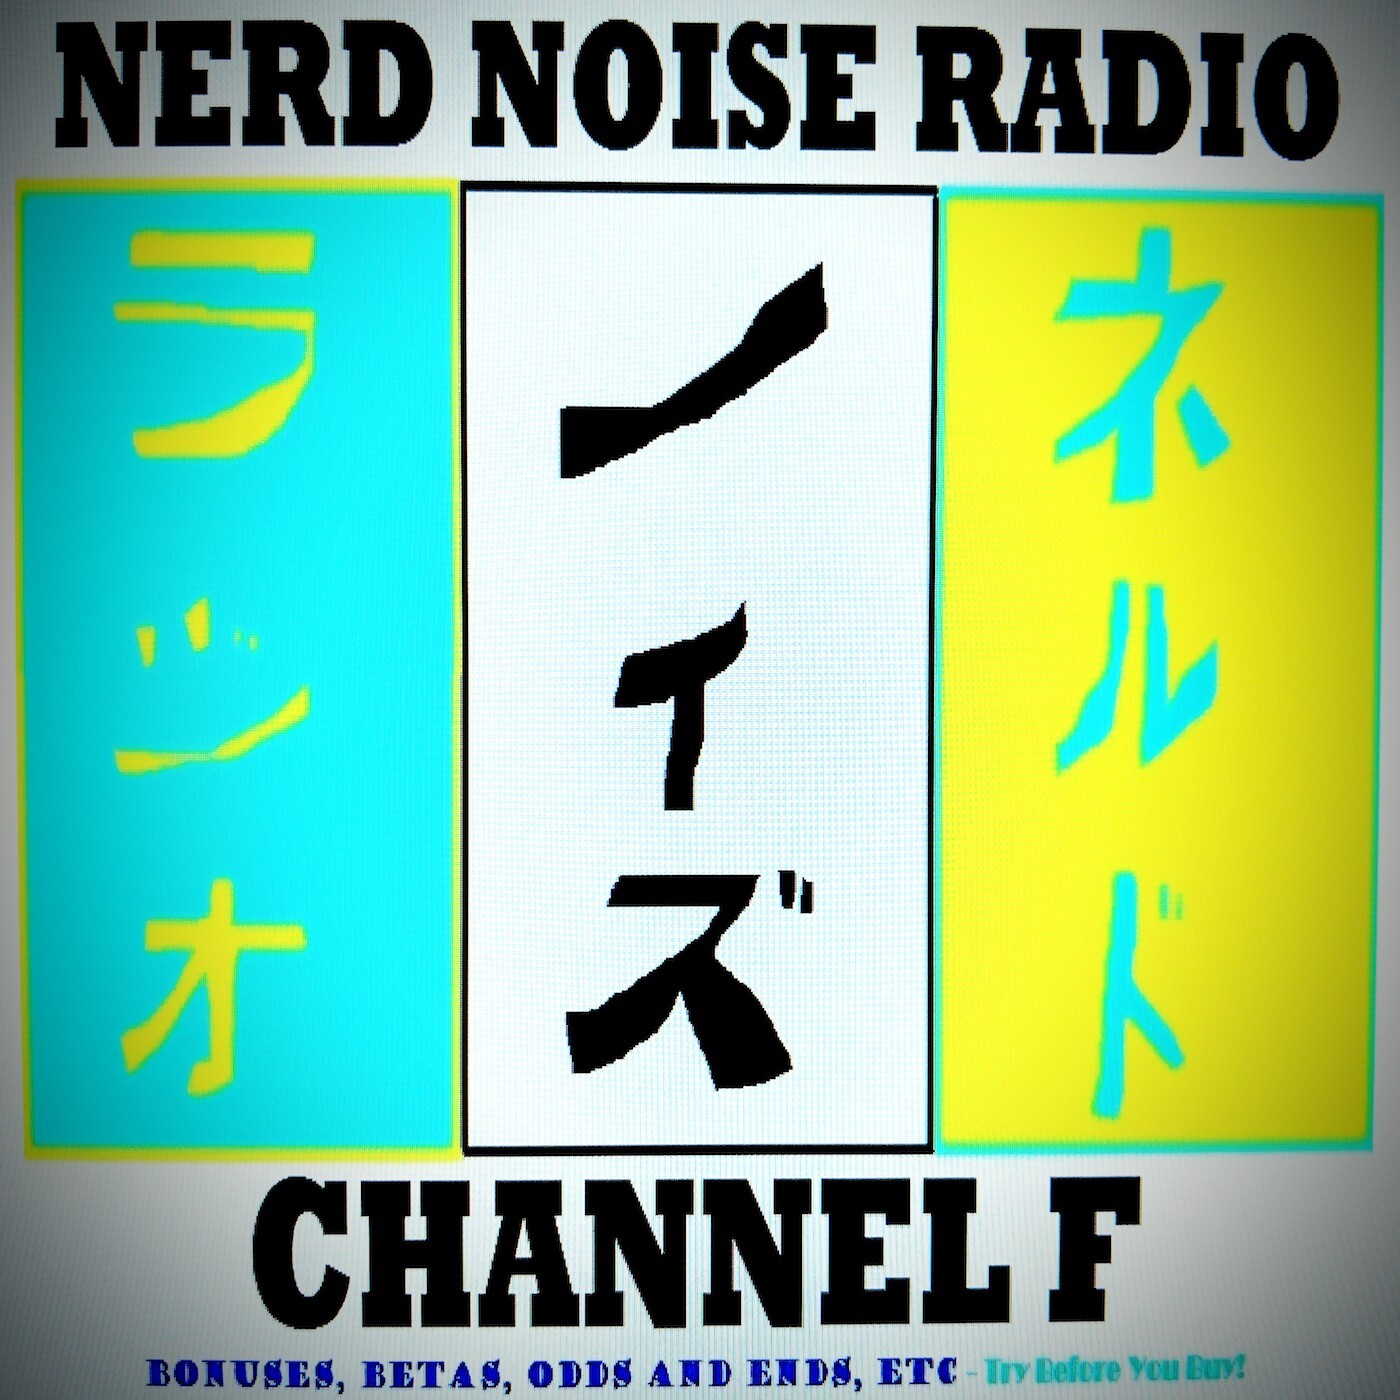 Nerd Noise Radio - Channel F: Special Rebroadcast - W.A.R.T. Radio - Episode 11: Indie Extravaganza